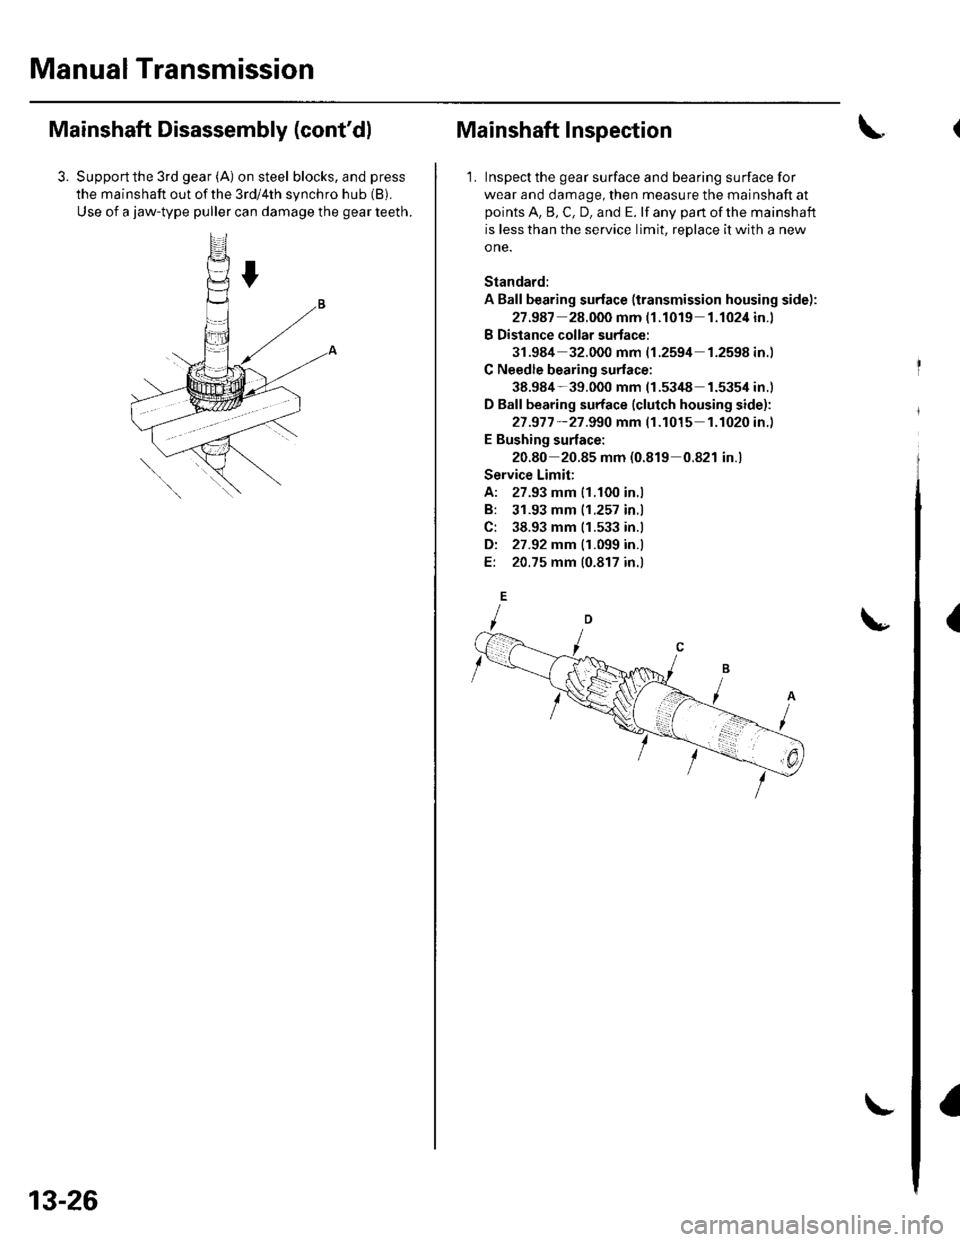 HONDA CIVIC 2003 7.G User Guide Manual Transmission
Mainshaft Disassembly (contdl
3. Supportthe 3rd gear (A) on steel blocks, and press
the mainshaft out of the 3rd/4th synchro hub (B).
Use of a jaw-type puller can damage the gear 